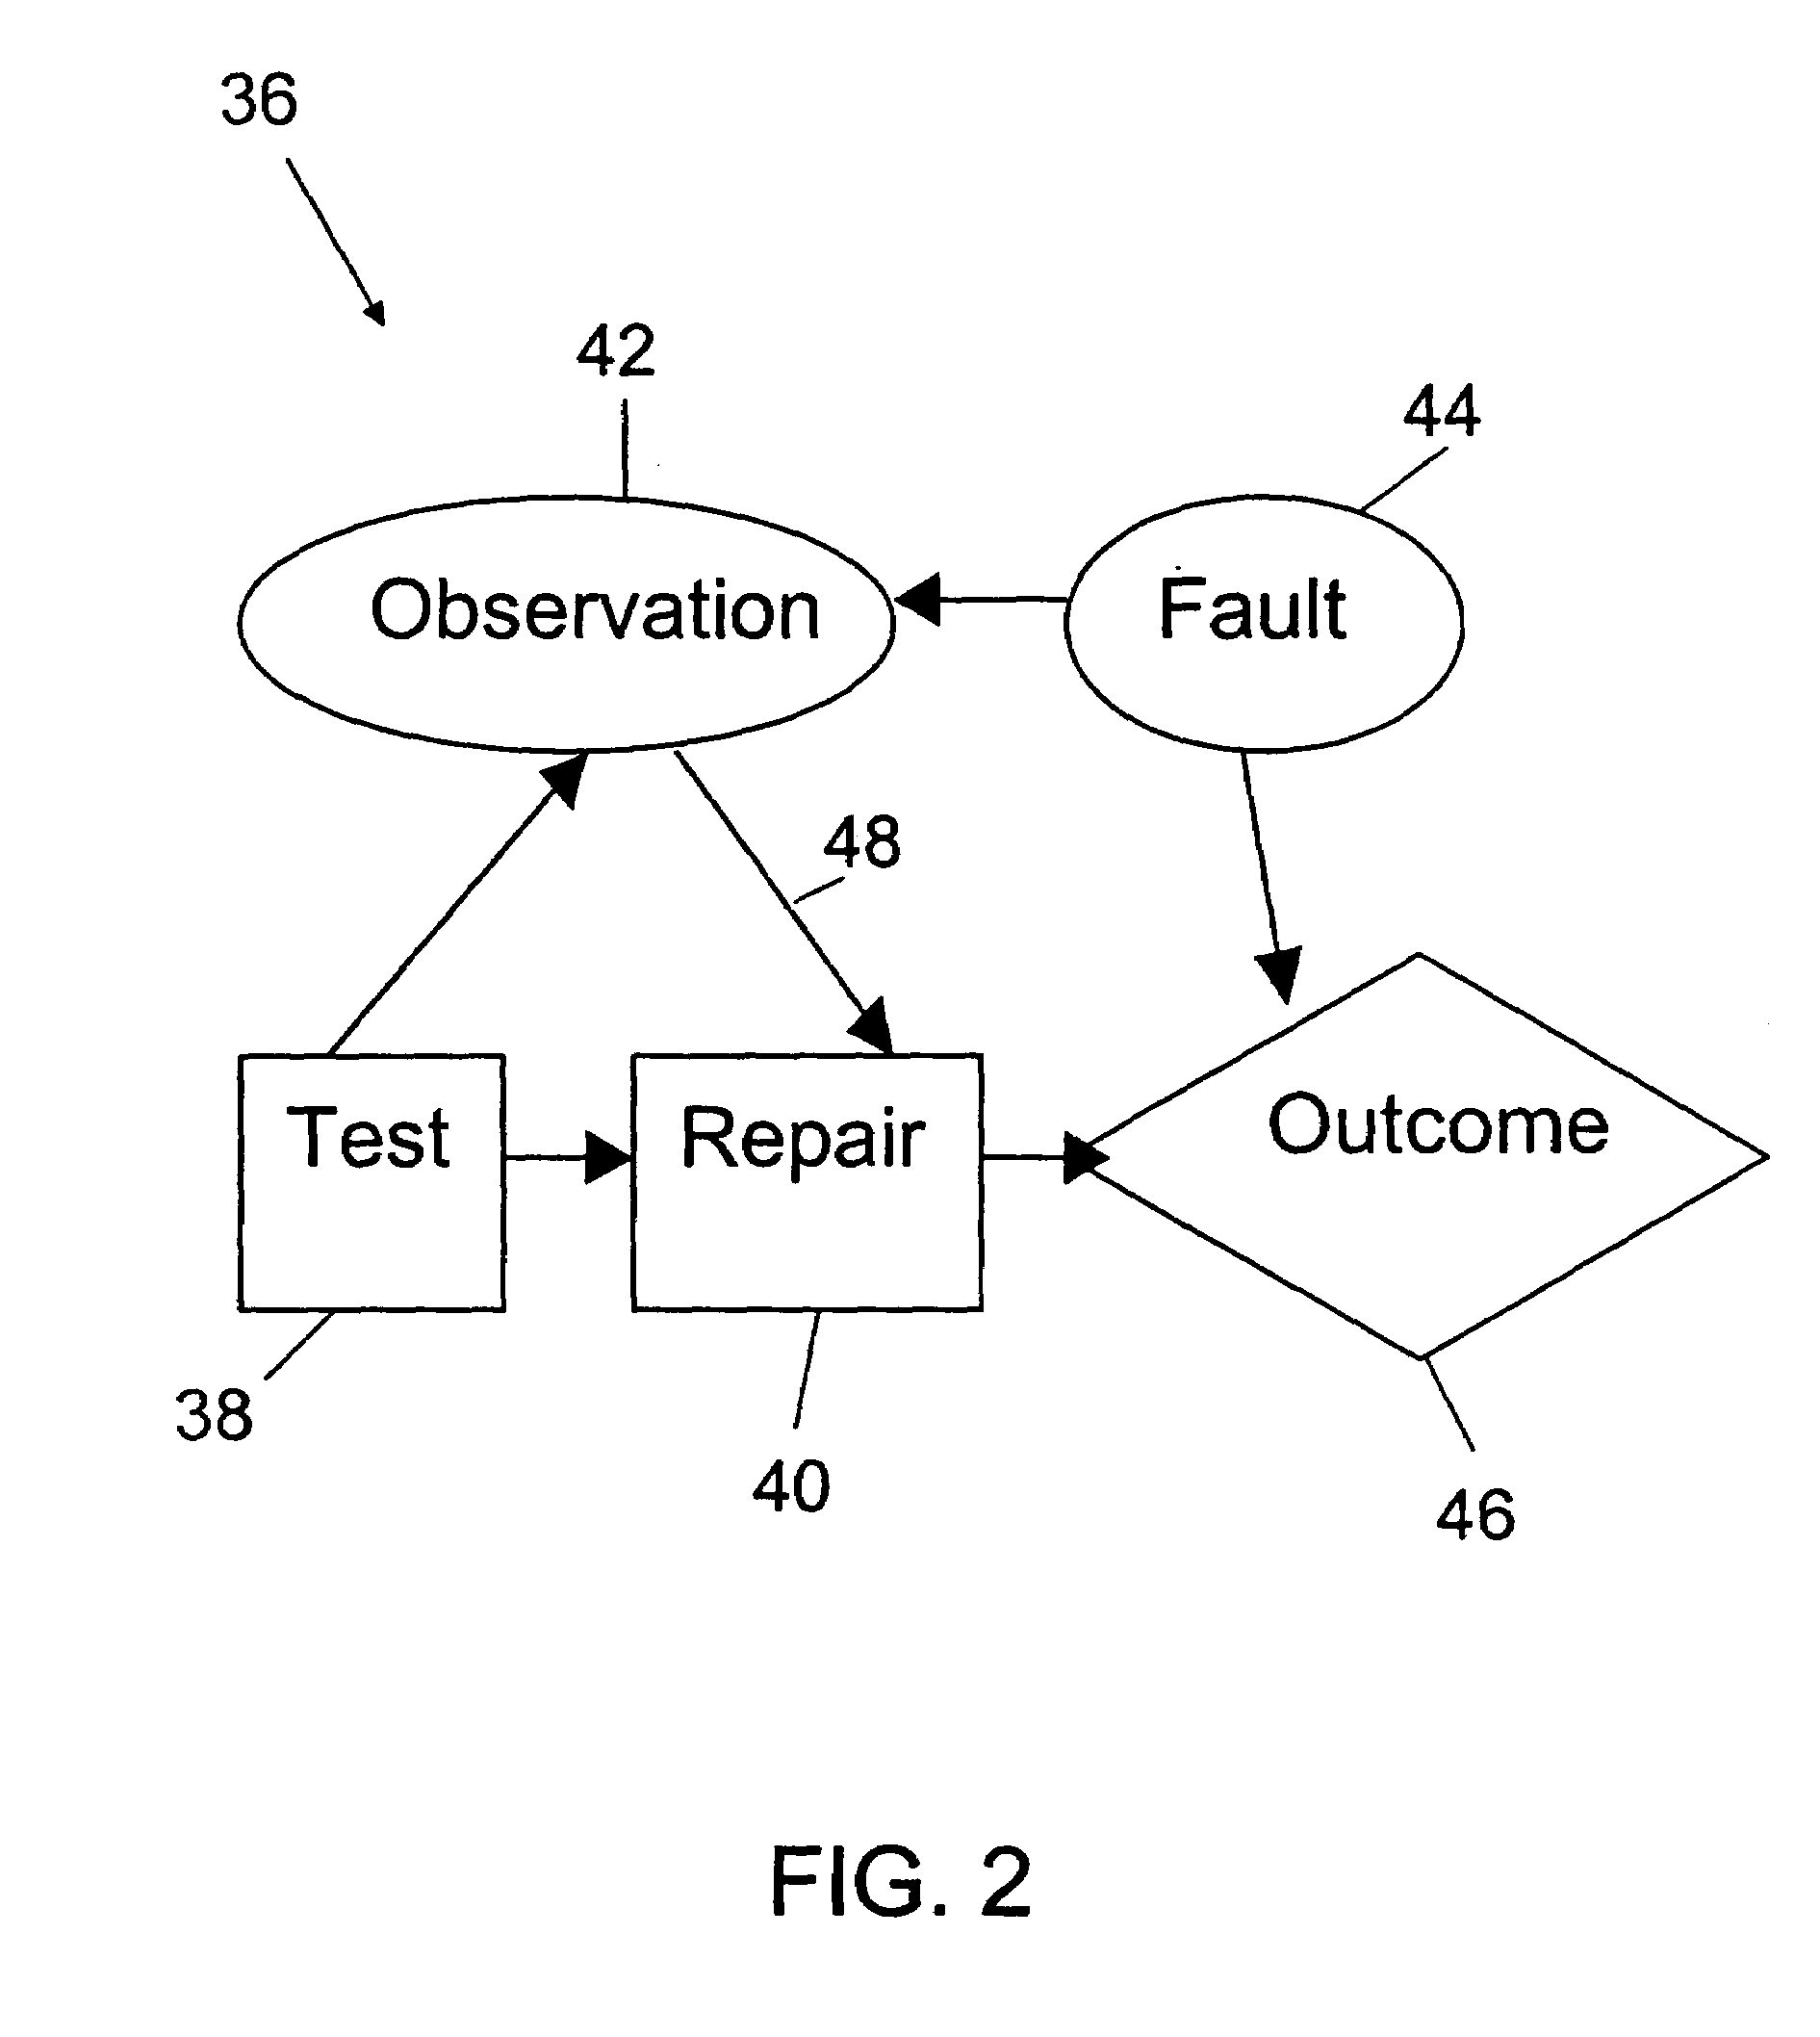 Diagnostic system and method for enabling multistage decision optimization for aircraft preflight dispatch